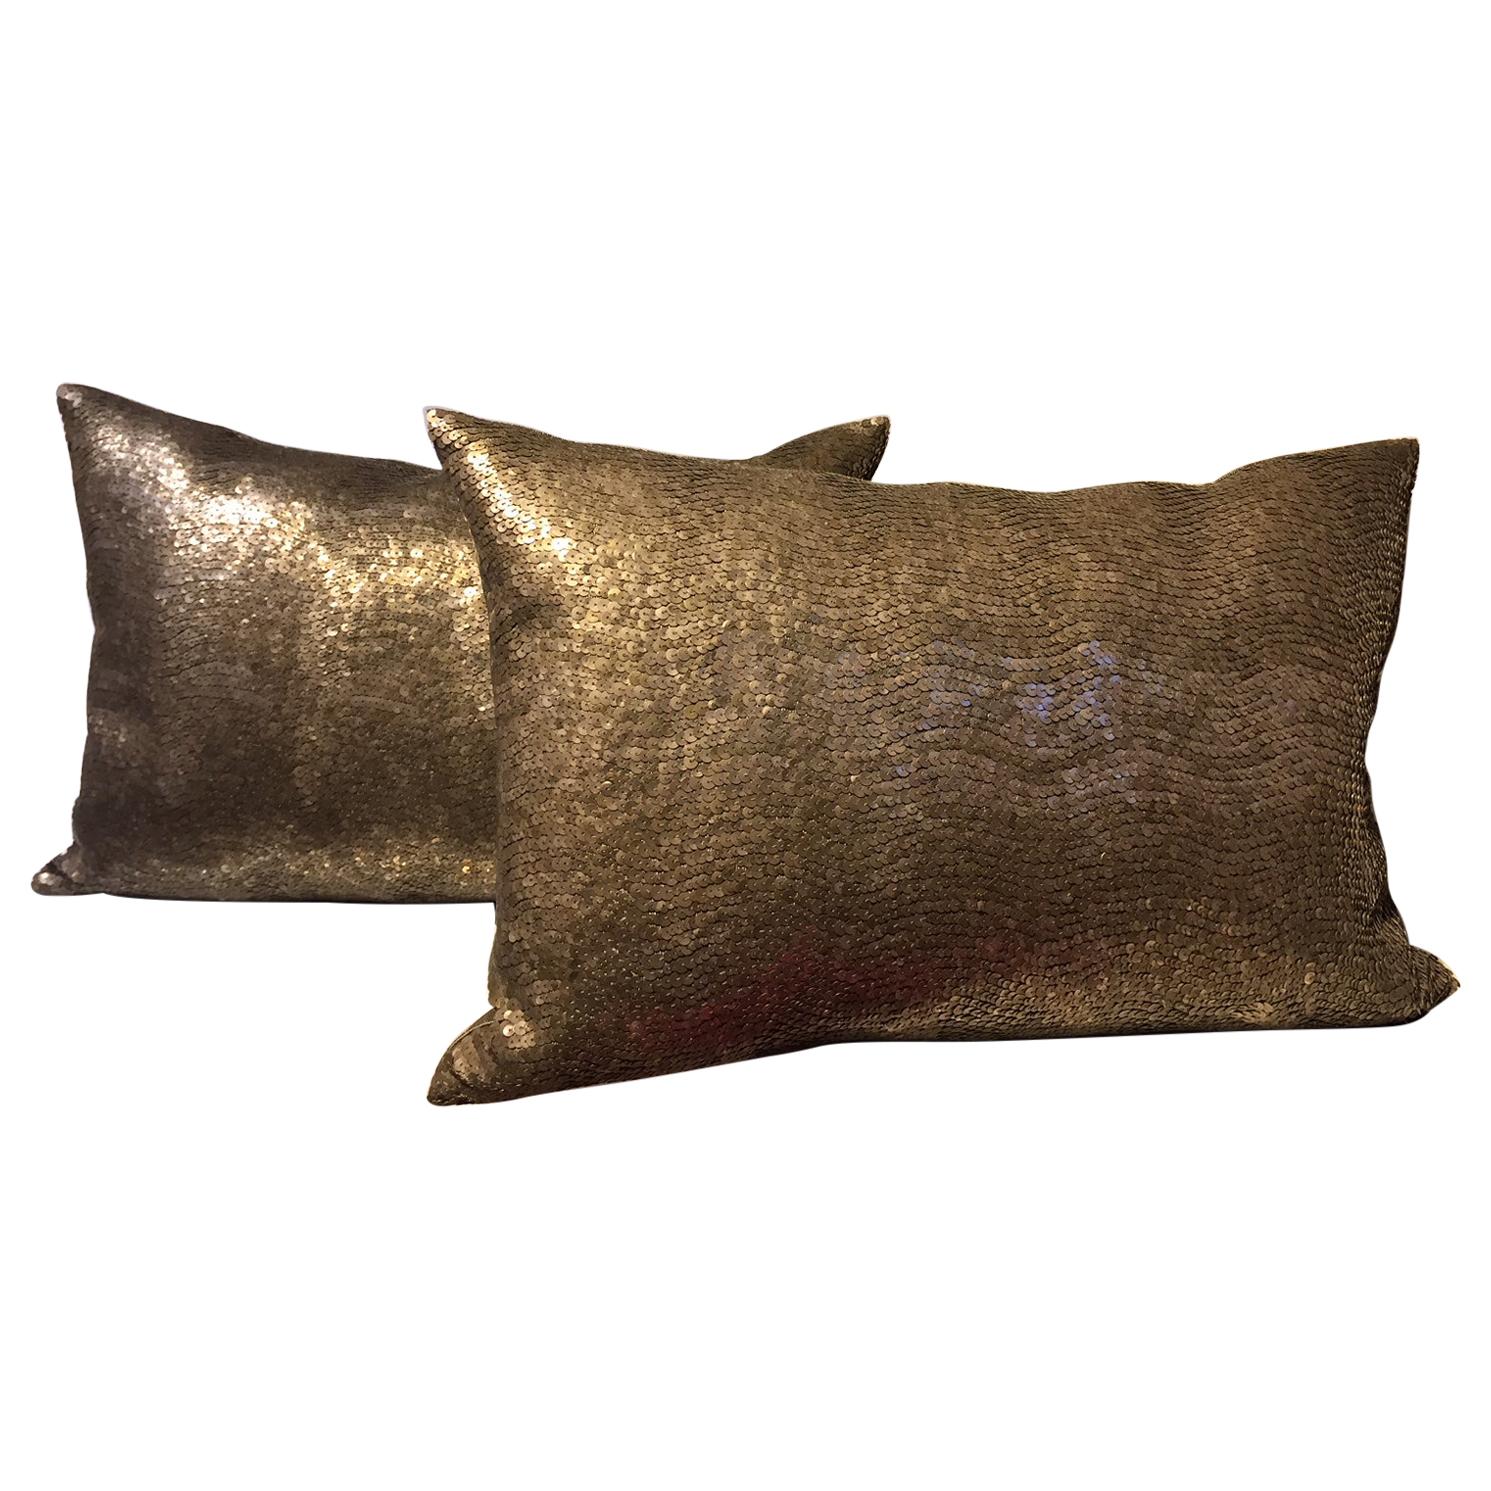 Silver Sequined Cushions Rectangular Hand Embroidery on Silk Color Peppercorn